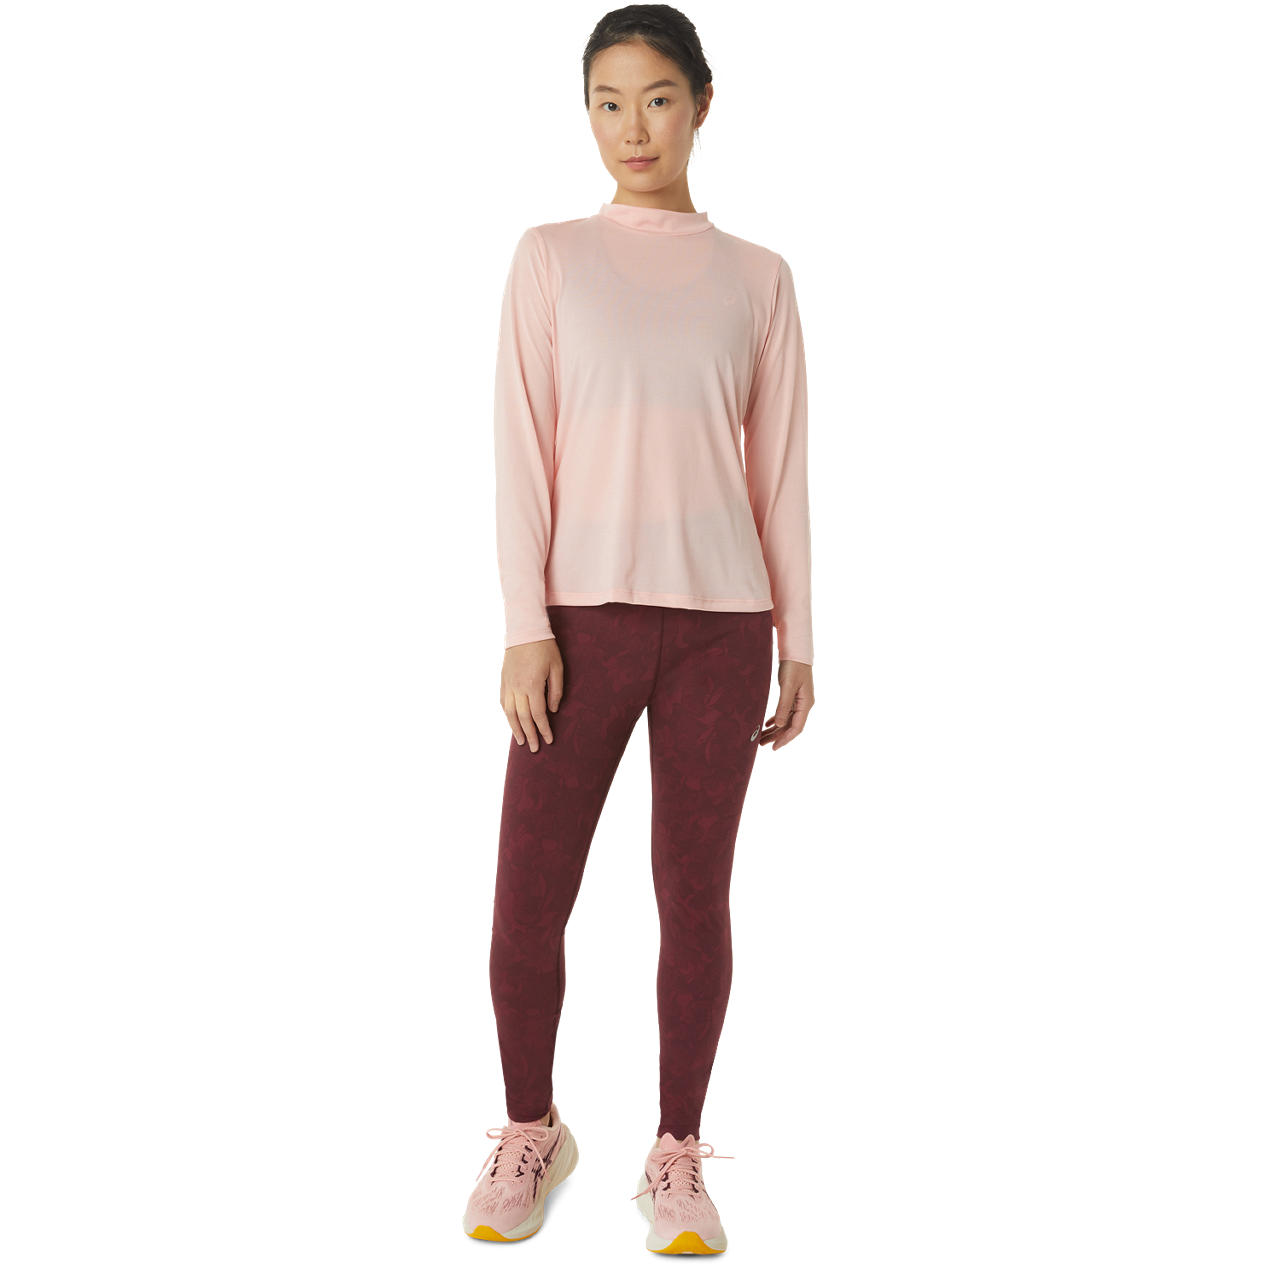 ASICS RUNKOYO MOCK NECK LS TOP, FROSTED ROSE, swatch